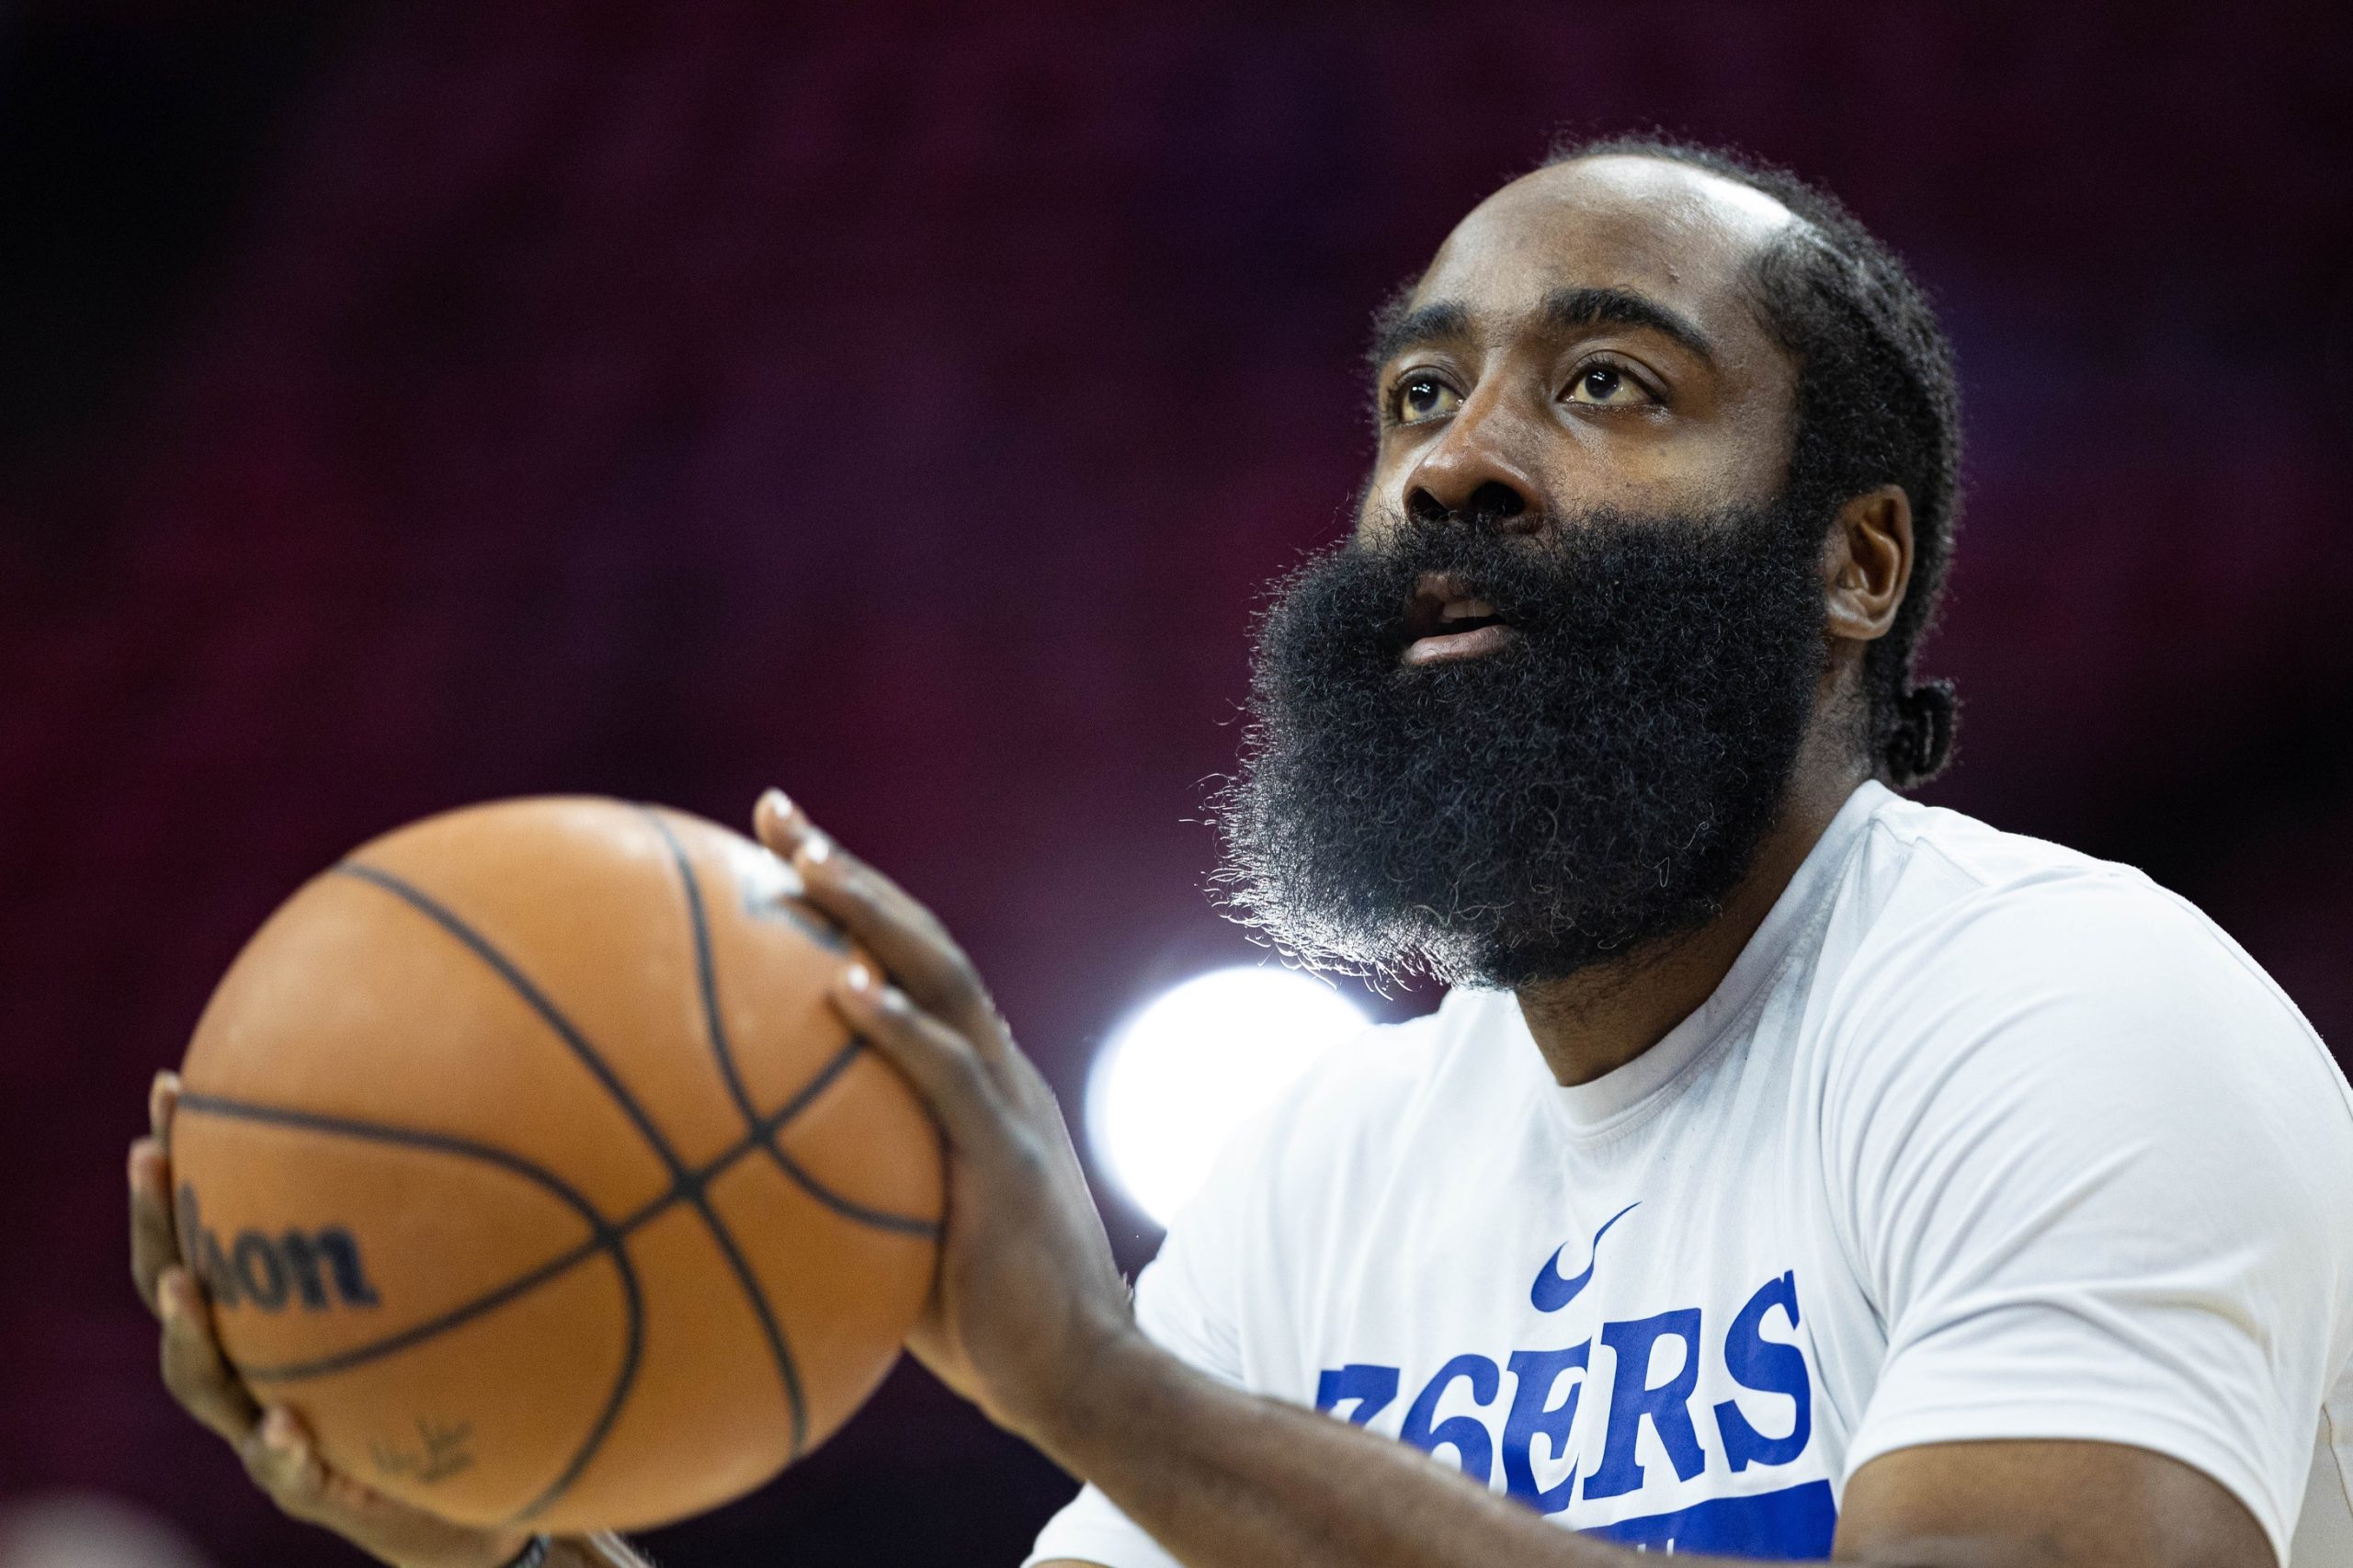 May 11, 2023; Philadelphia, Pennsylvania, USA; Philadelphia 76ers guard James Harden warms up before game six of the 2023 NBA playoffs against the Boston Celtics at Wells Fargo Center. Mandatory Credit: Bill Streicher-USA TODAY Sports